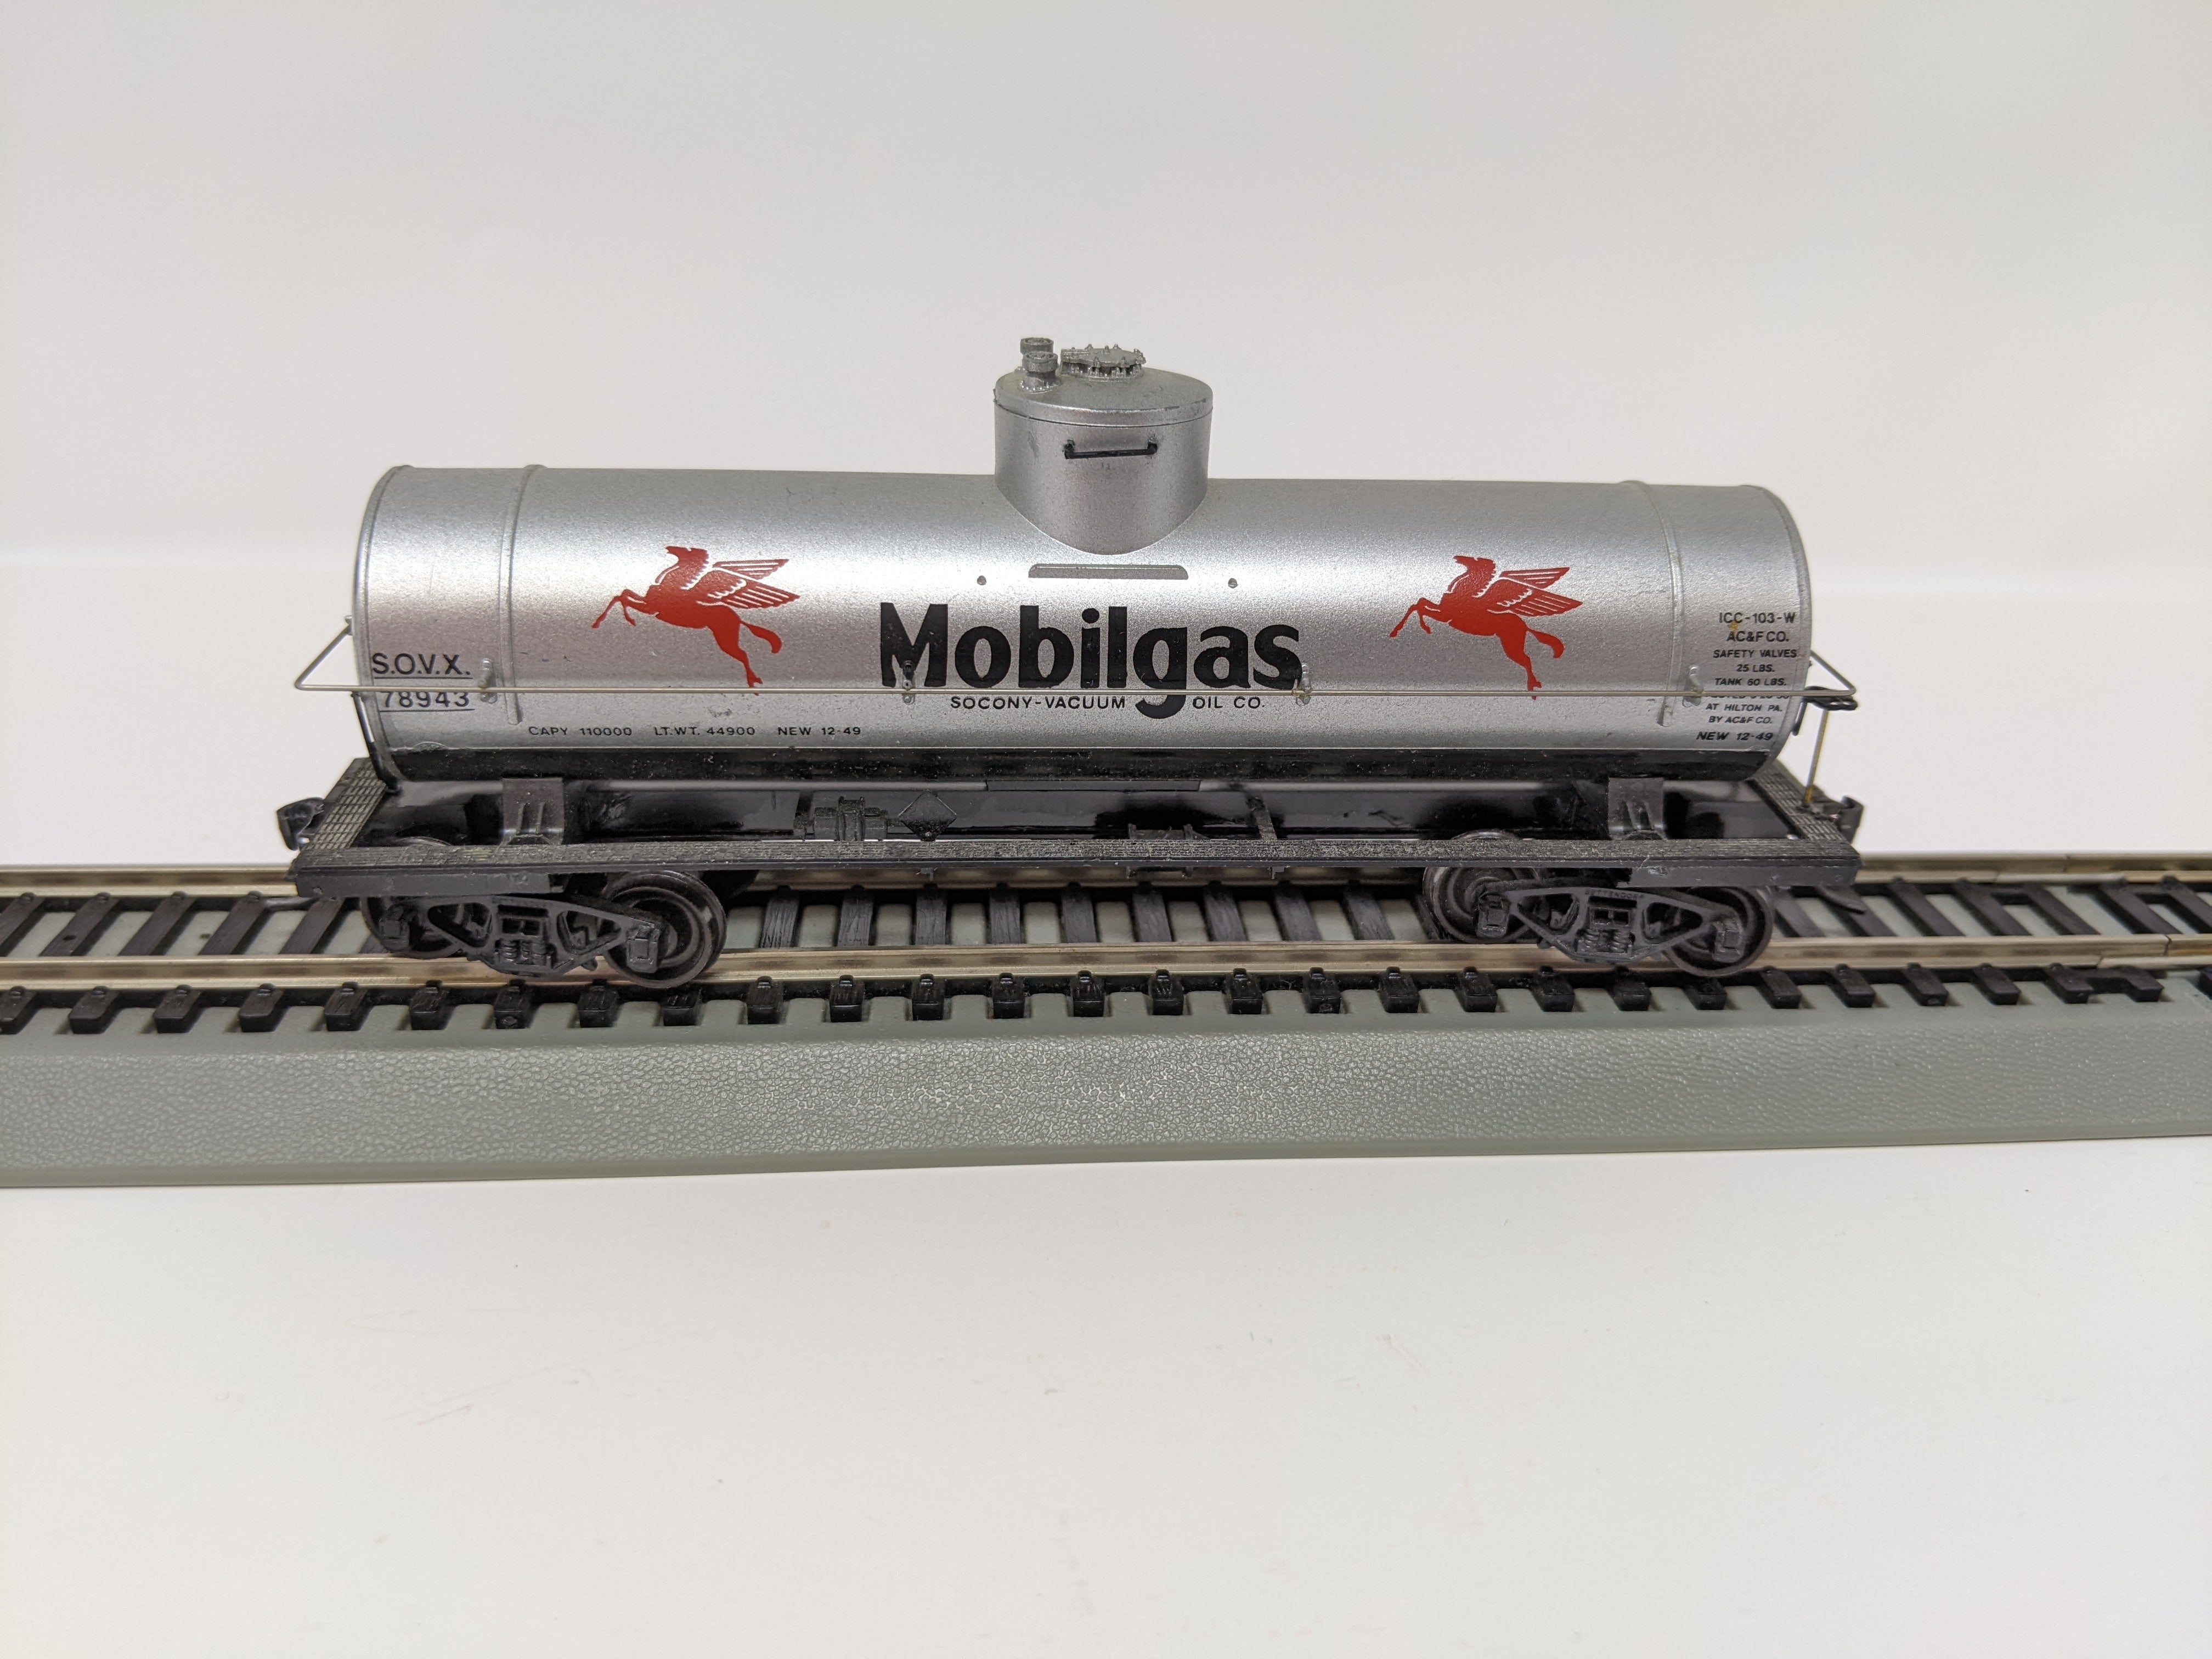 USED Red Caboose HO Scale, Single Dome Tank Car, Mobilgas SOVX #78943